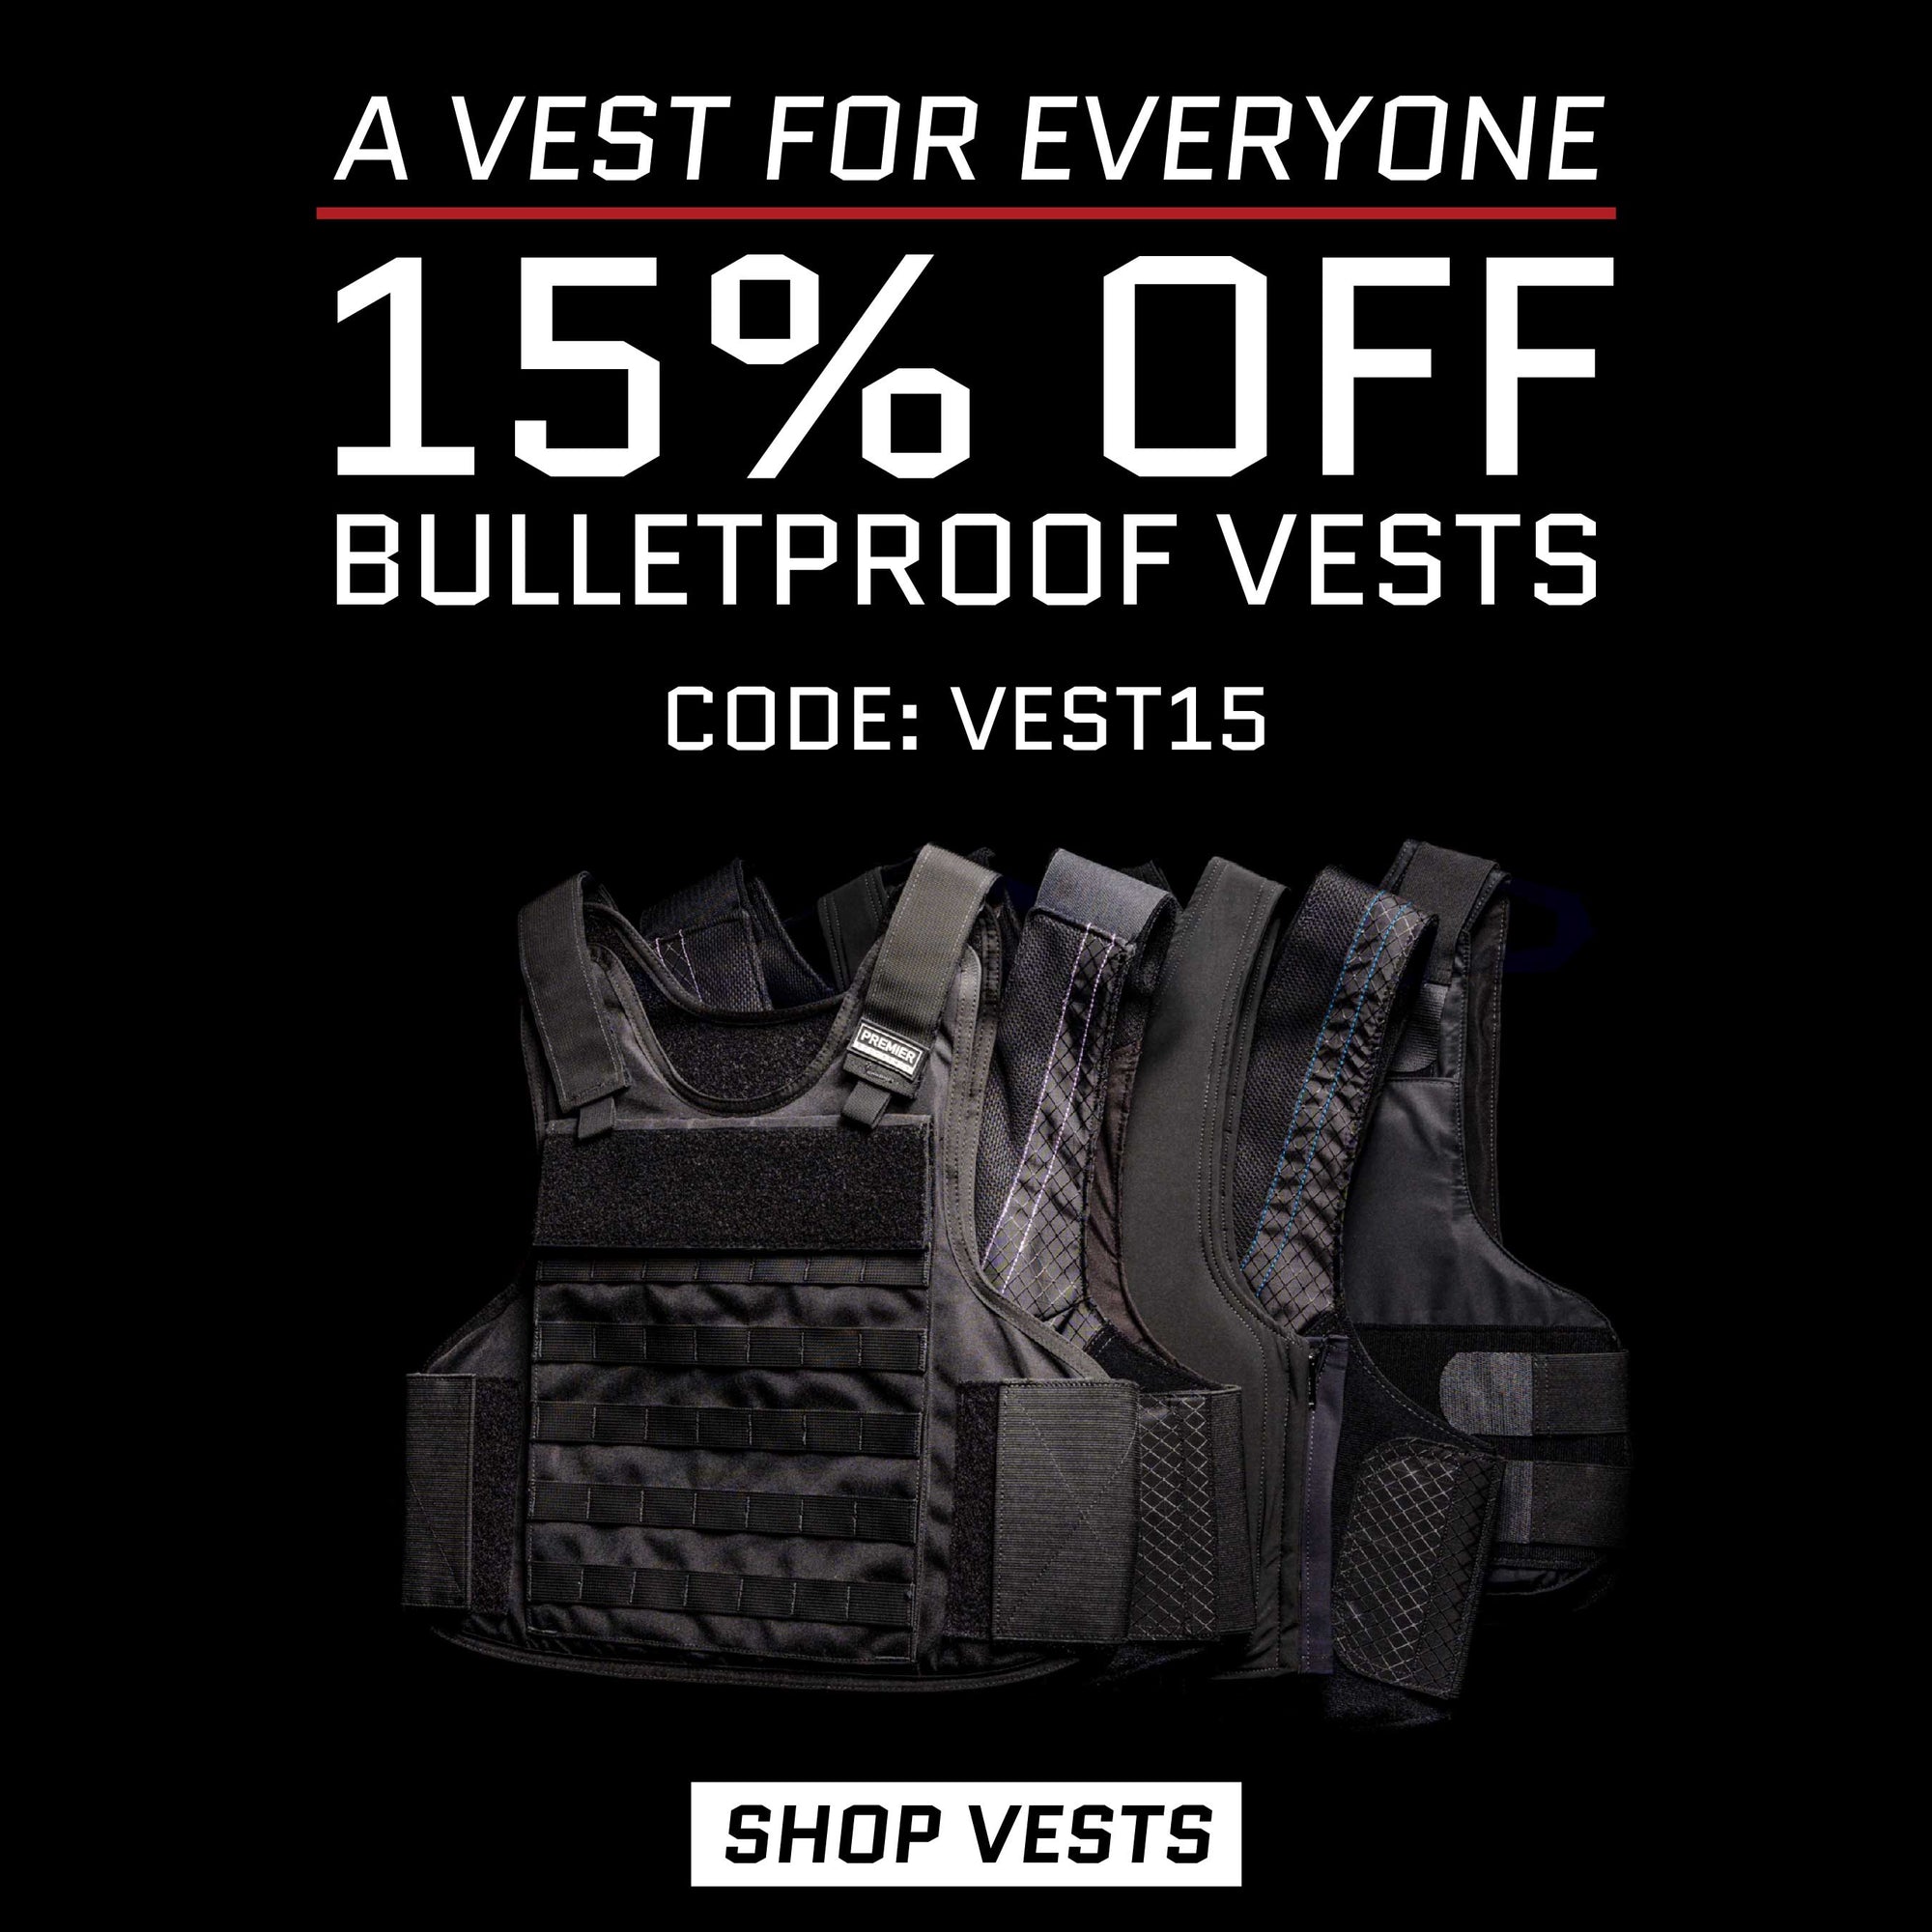 bulletproof vest sale. 15% off tactical and concealable body armor vests